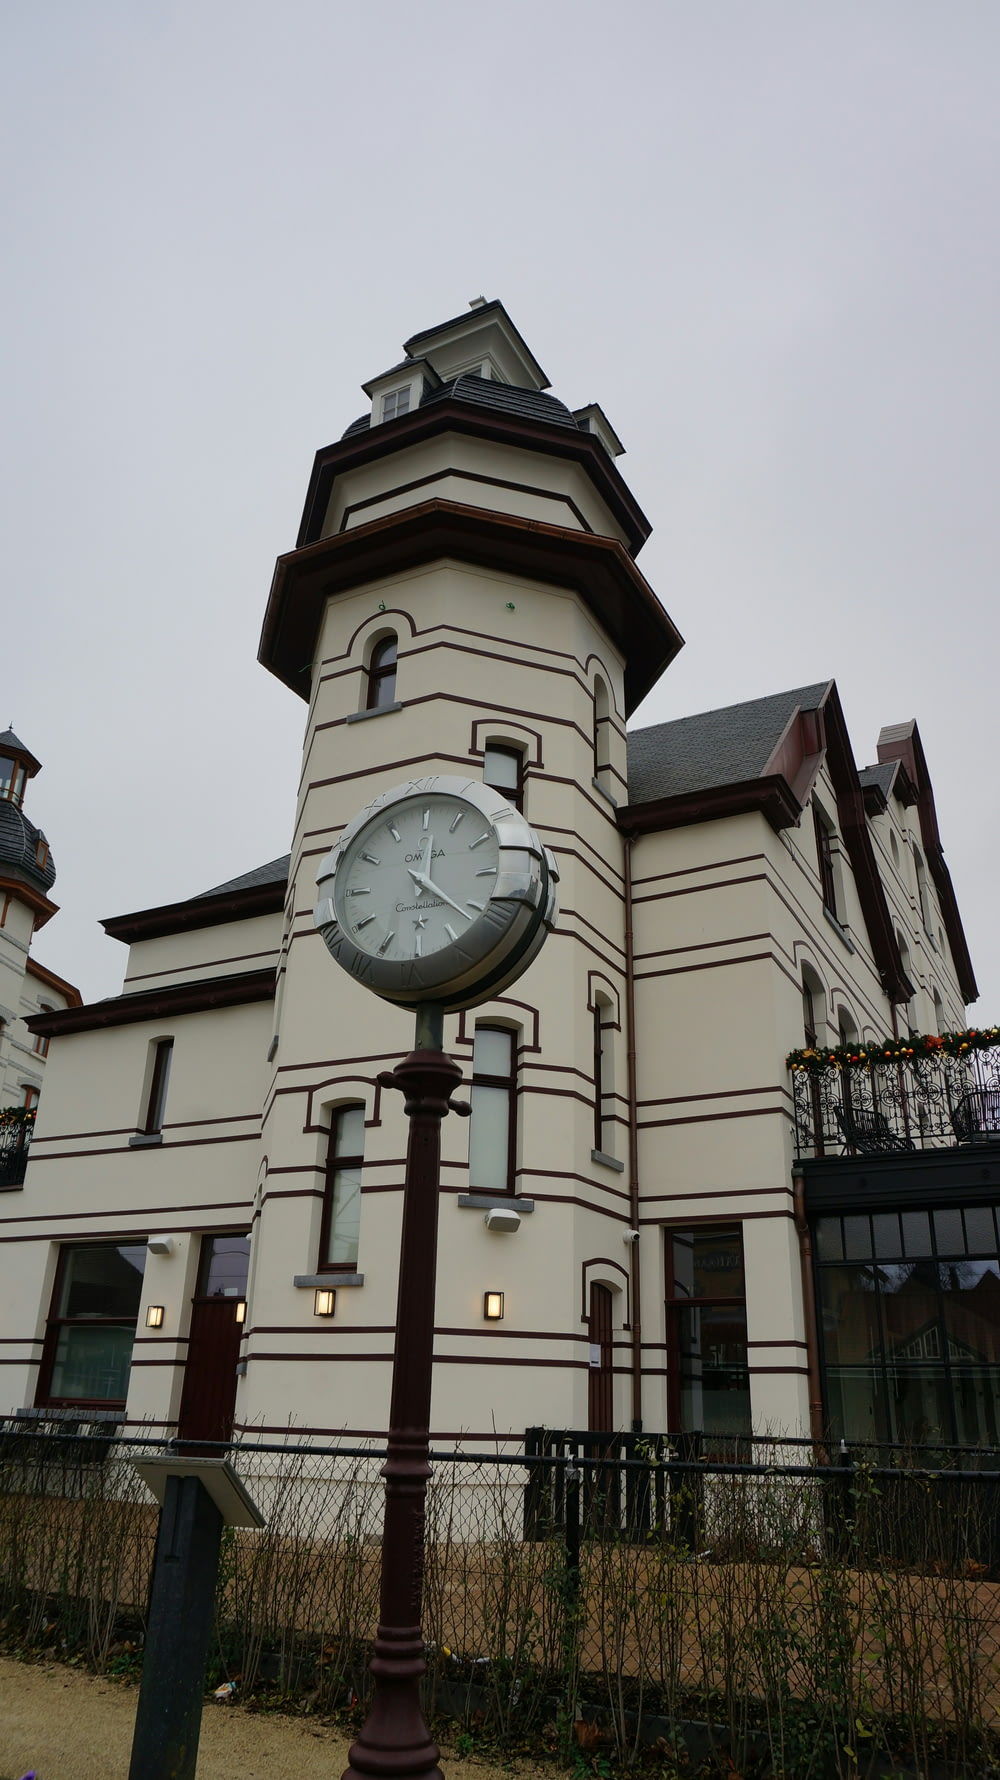 a clock on a pole in front of a building